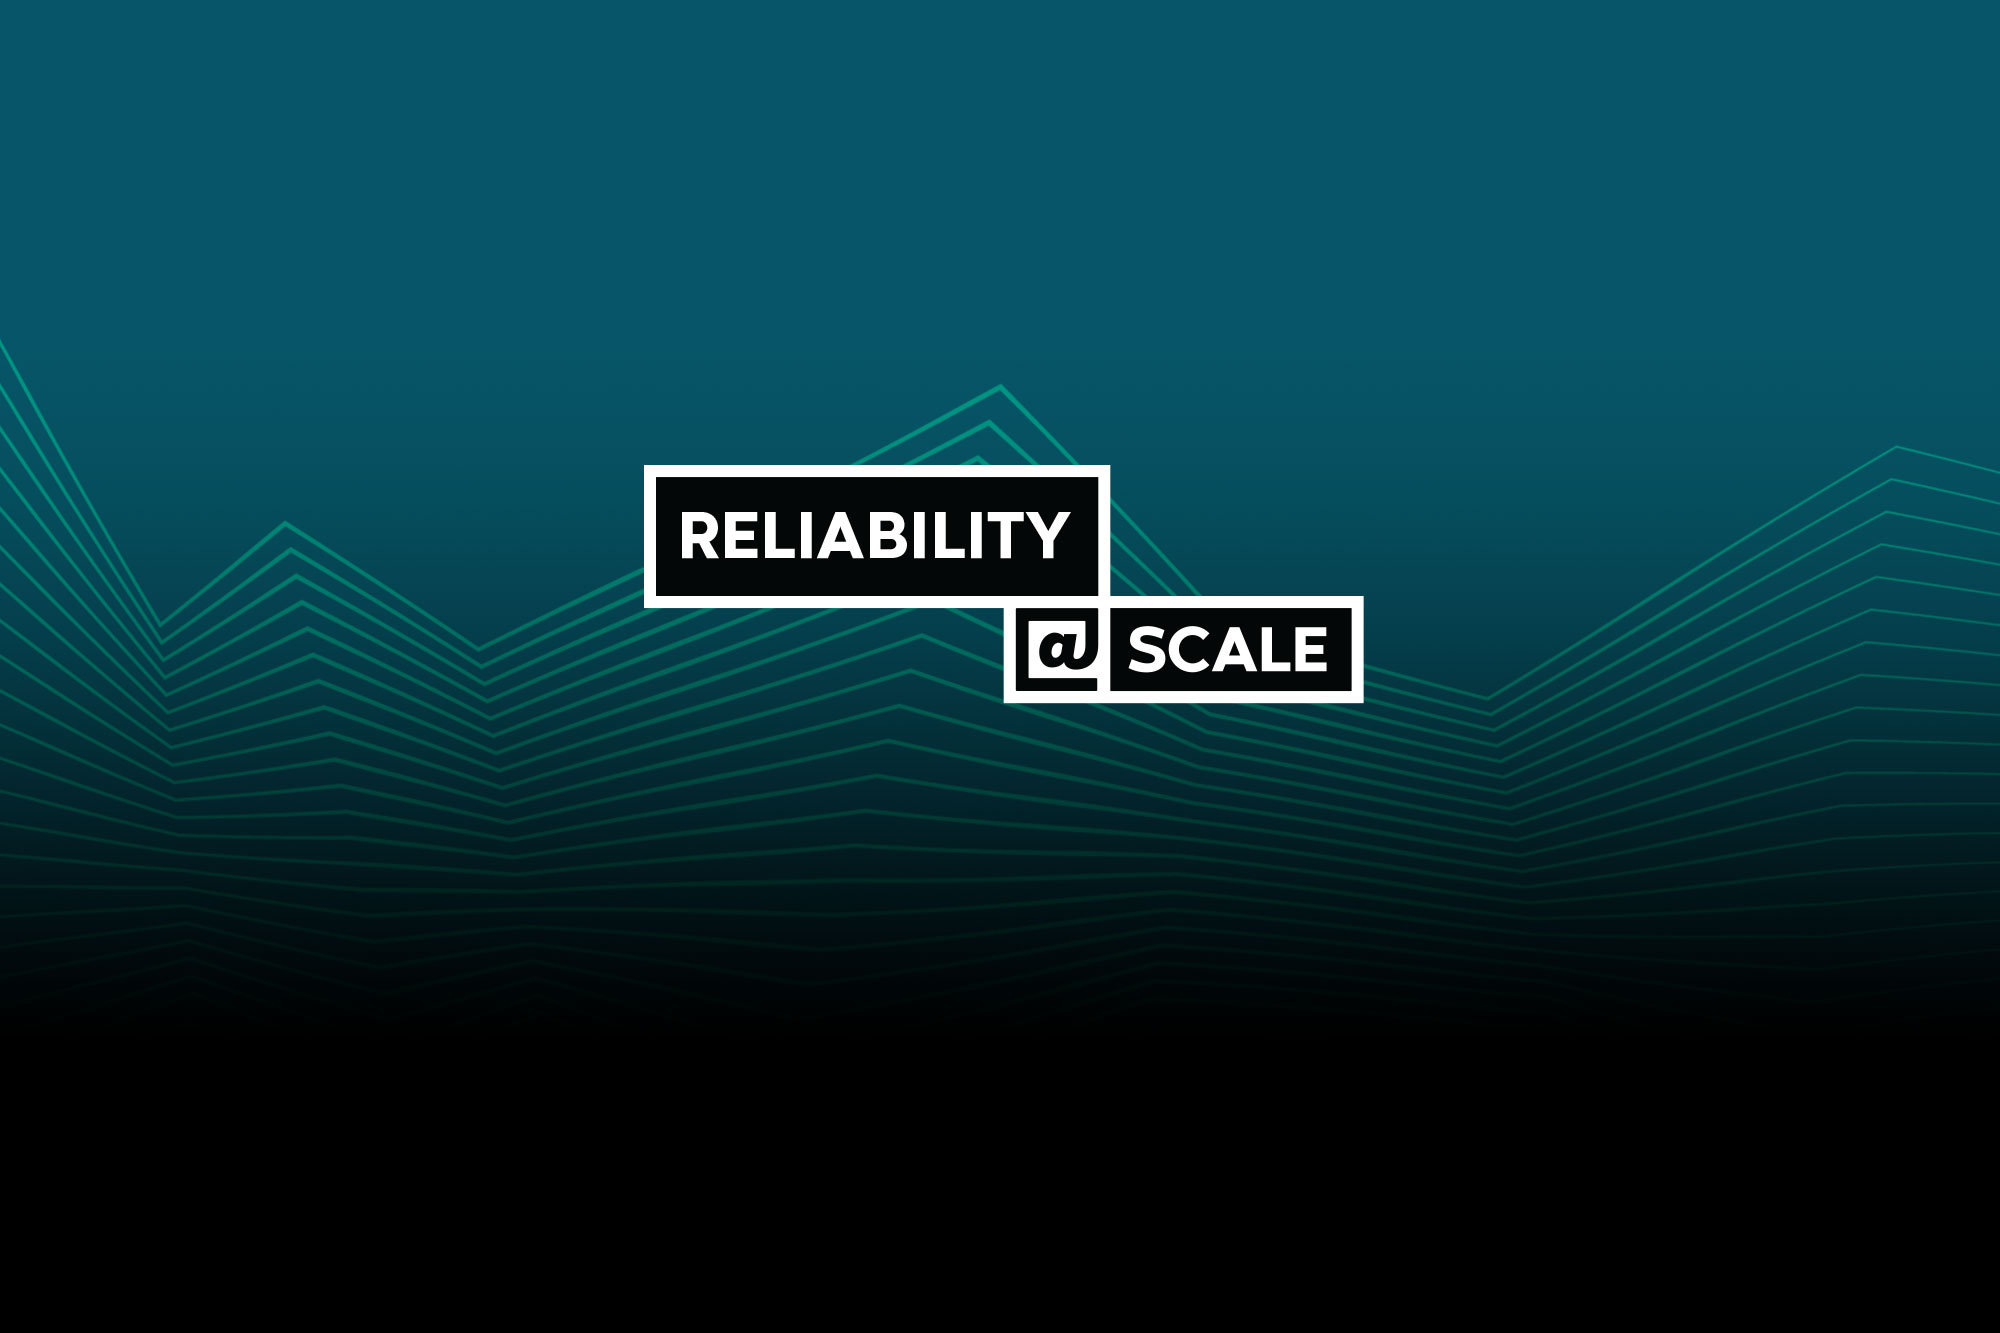 Reliability @Scale